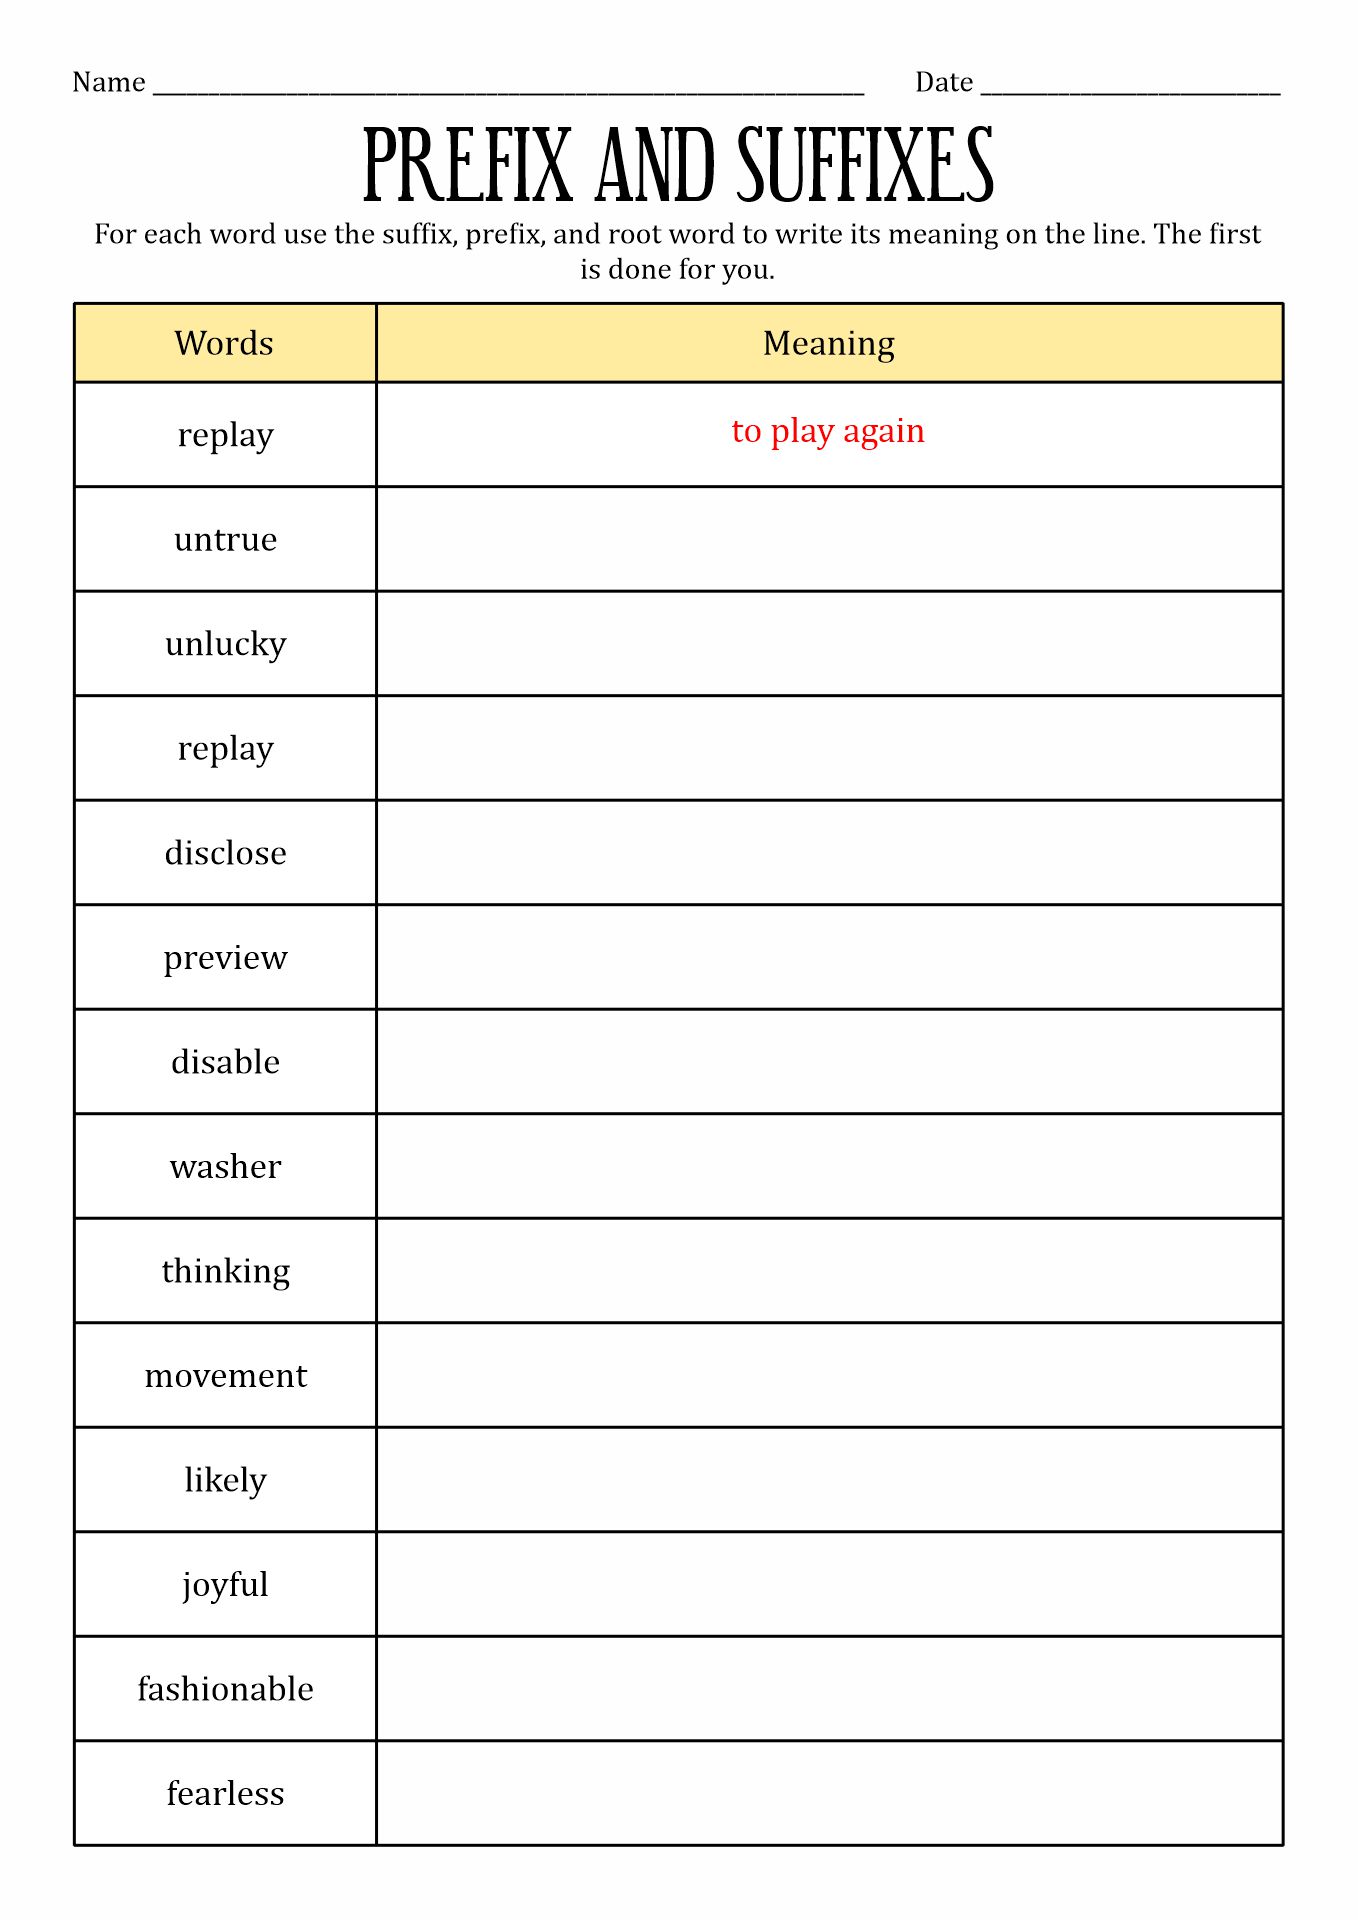 suffix-and-prefix-worksheets-free